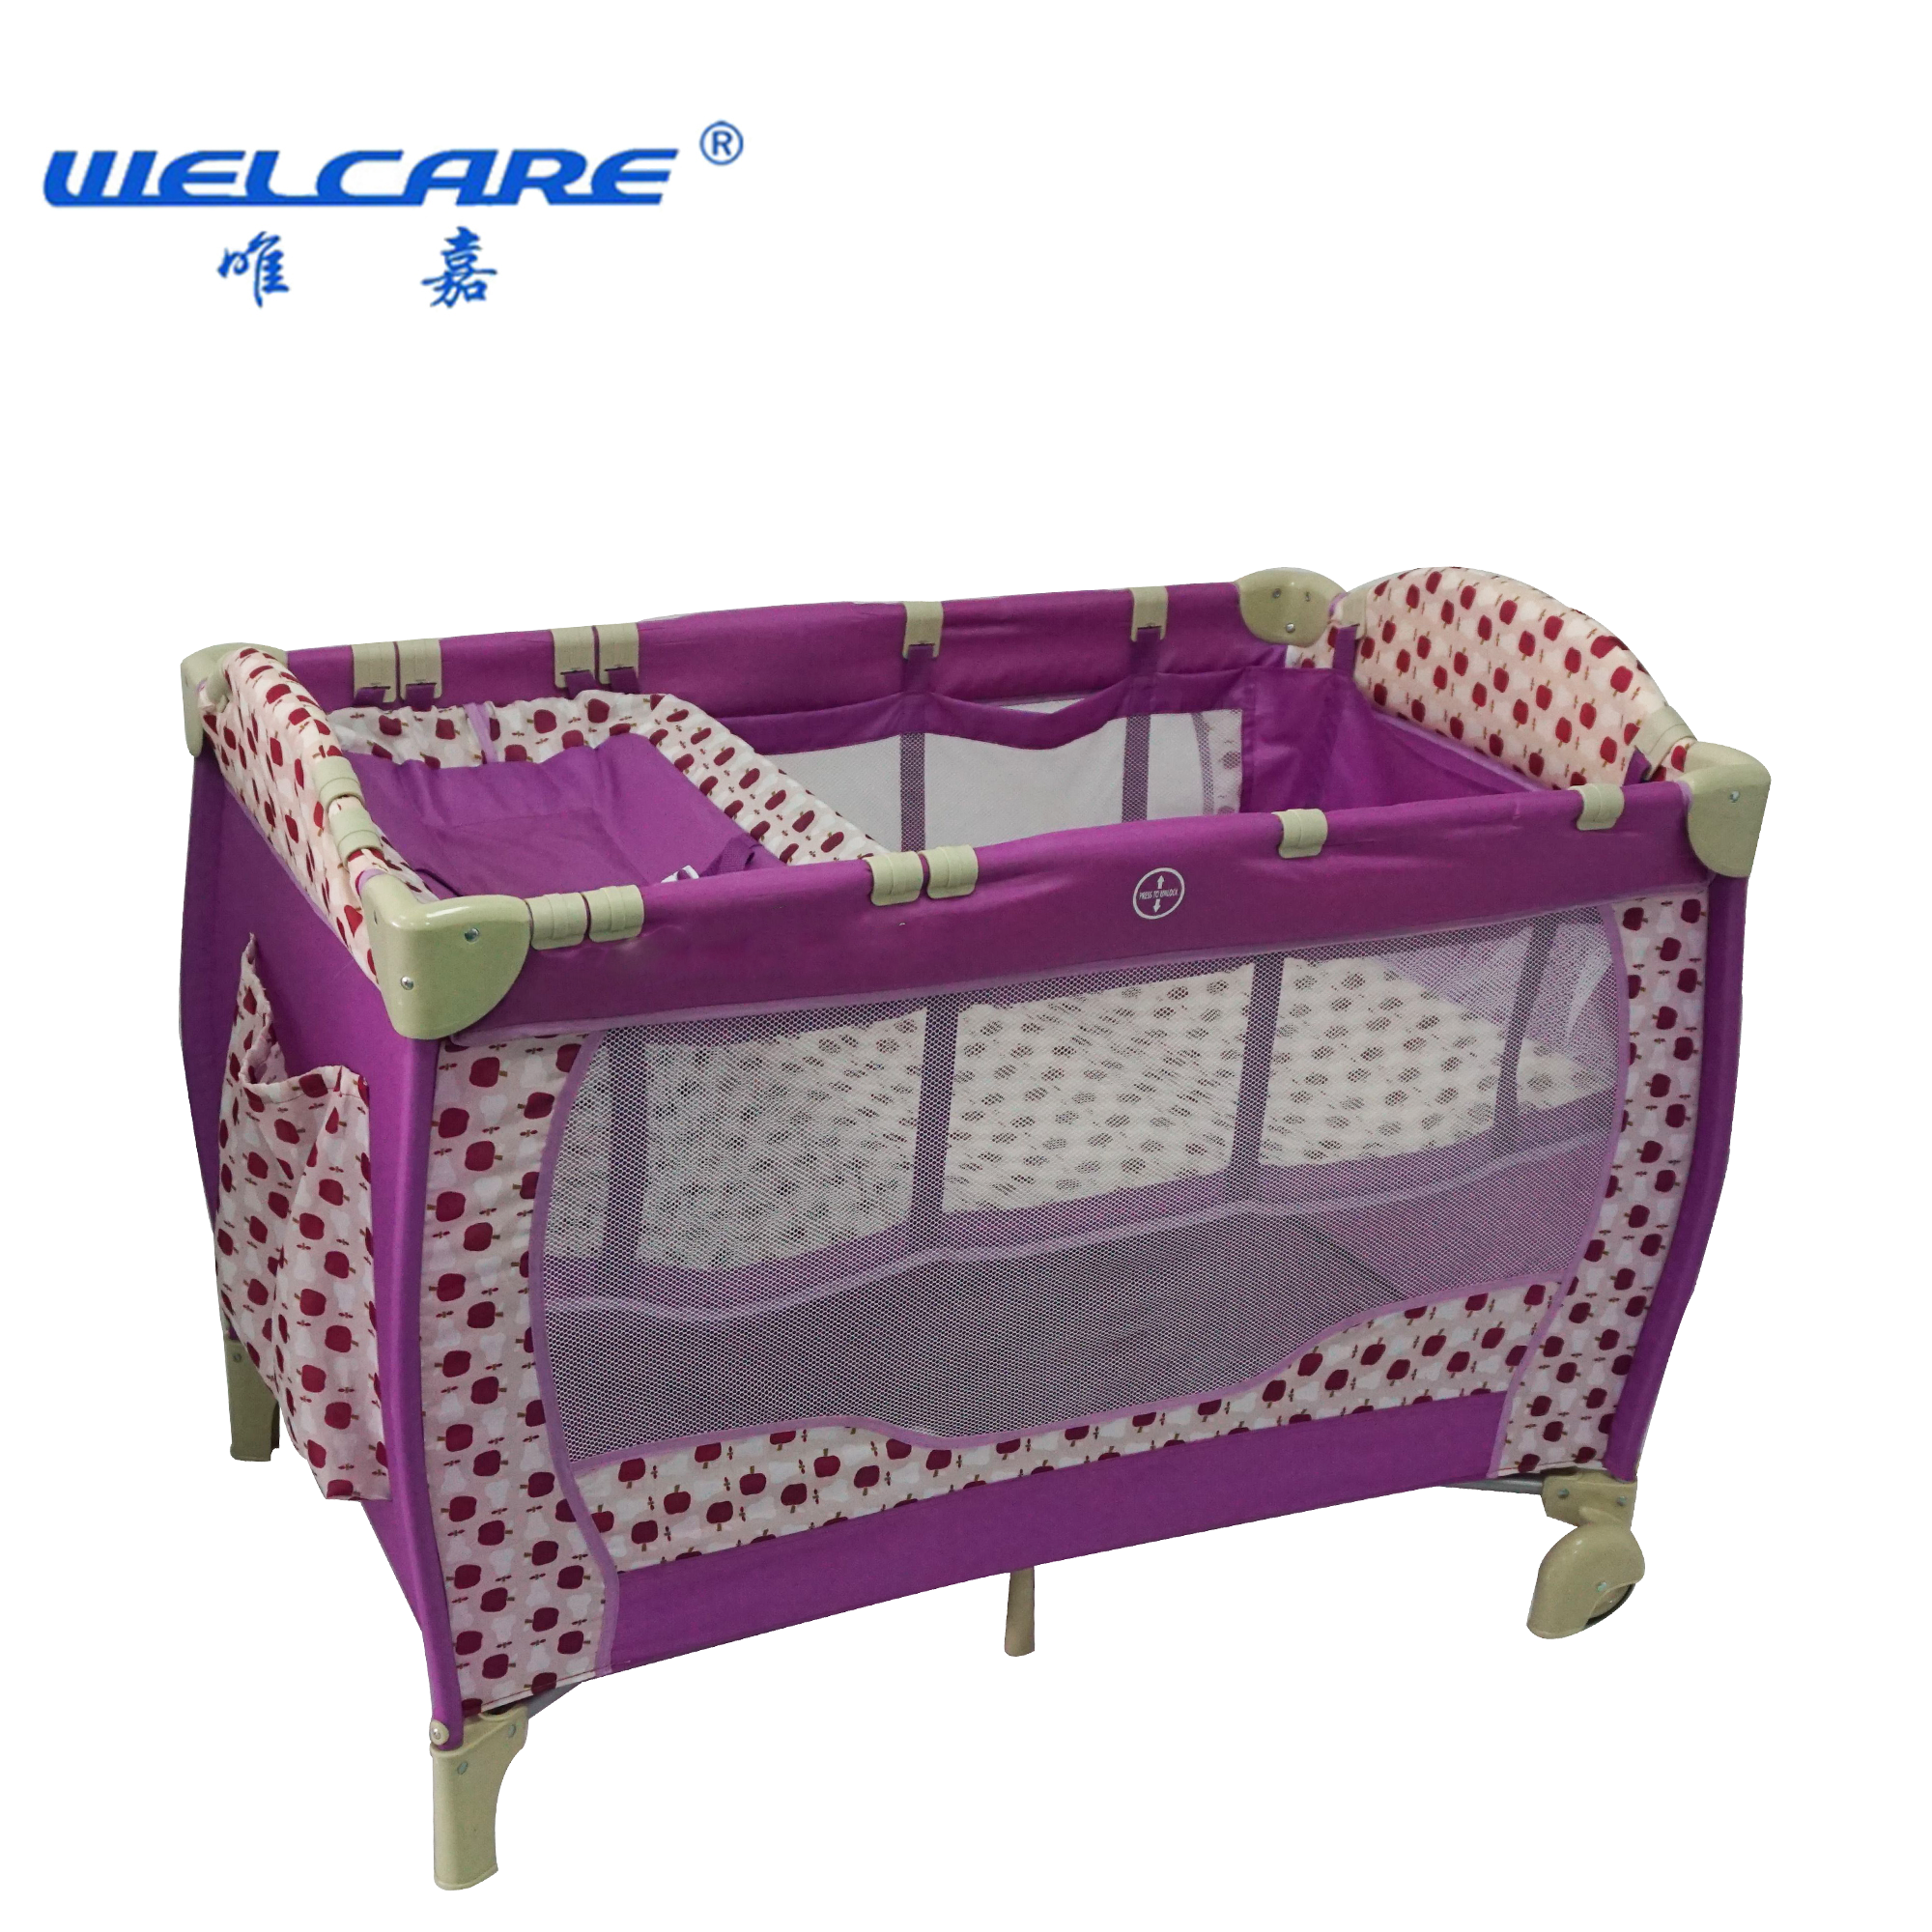 Large Travel Cot For Toddlers Factory